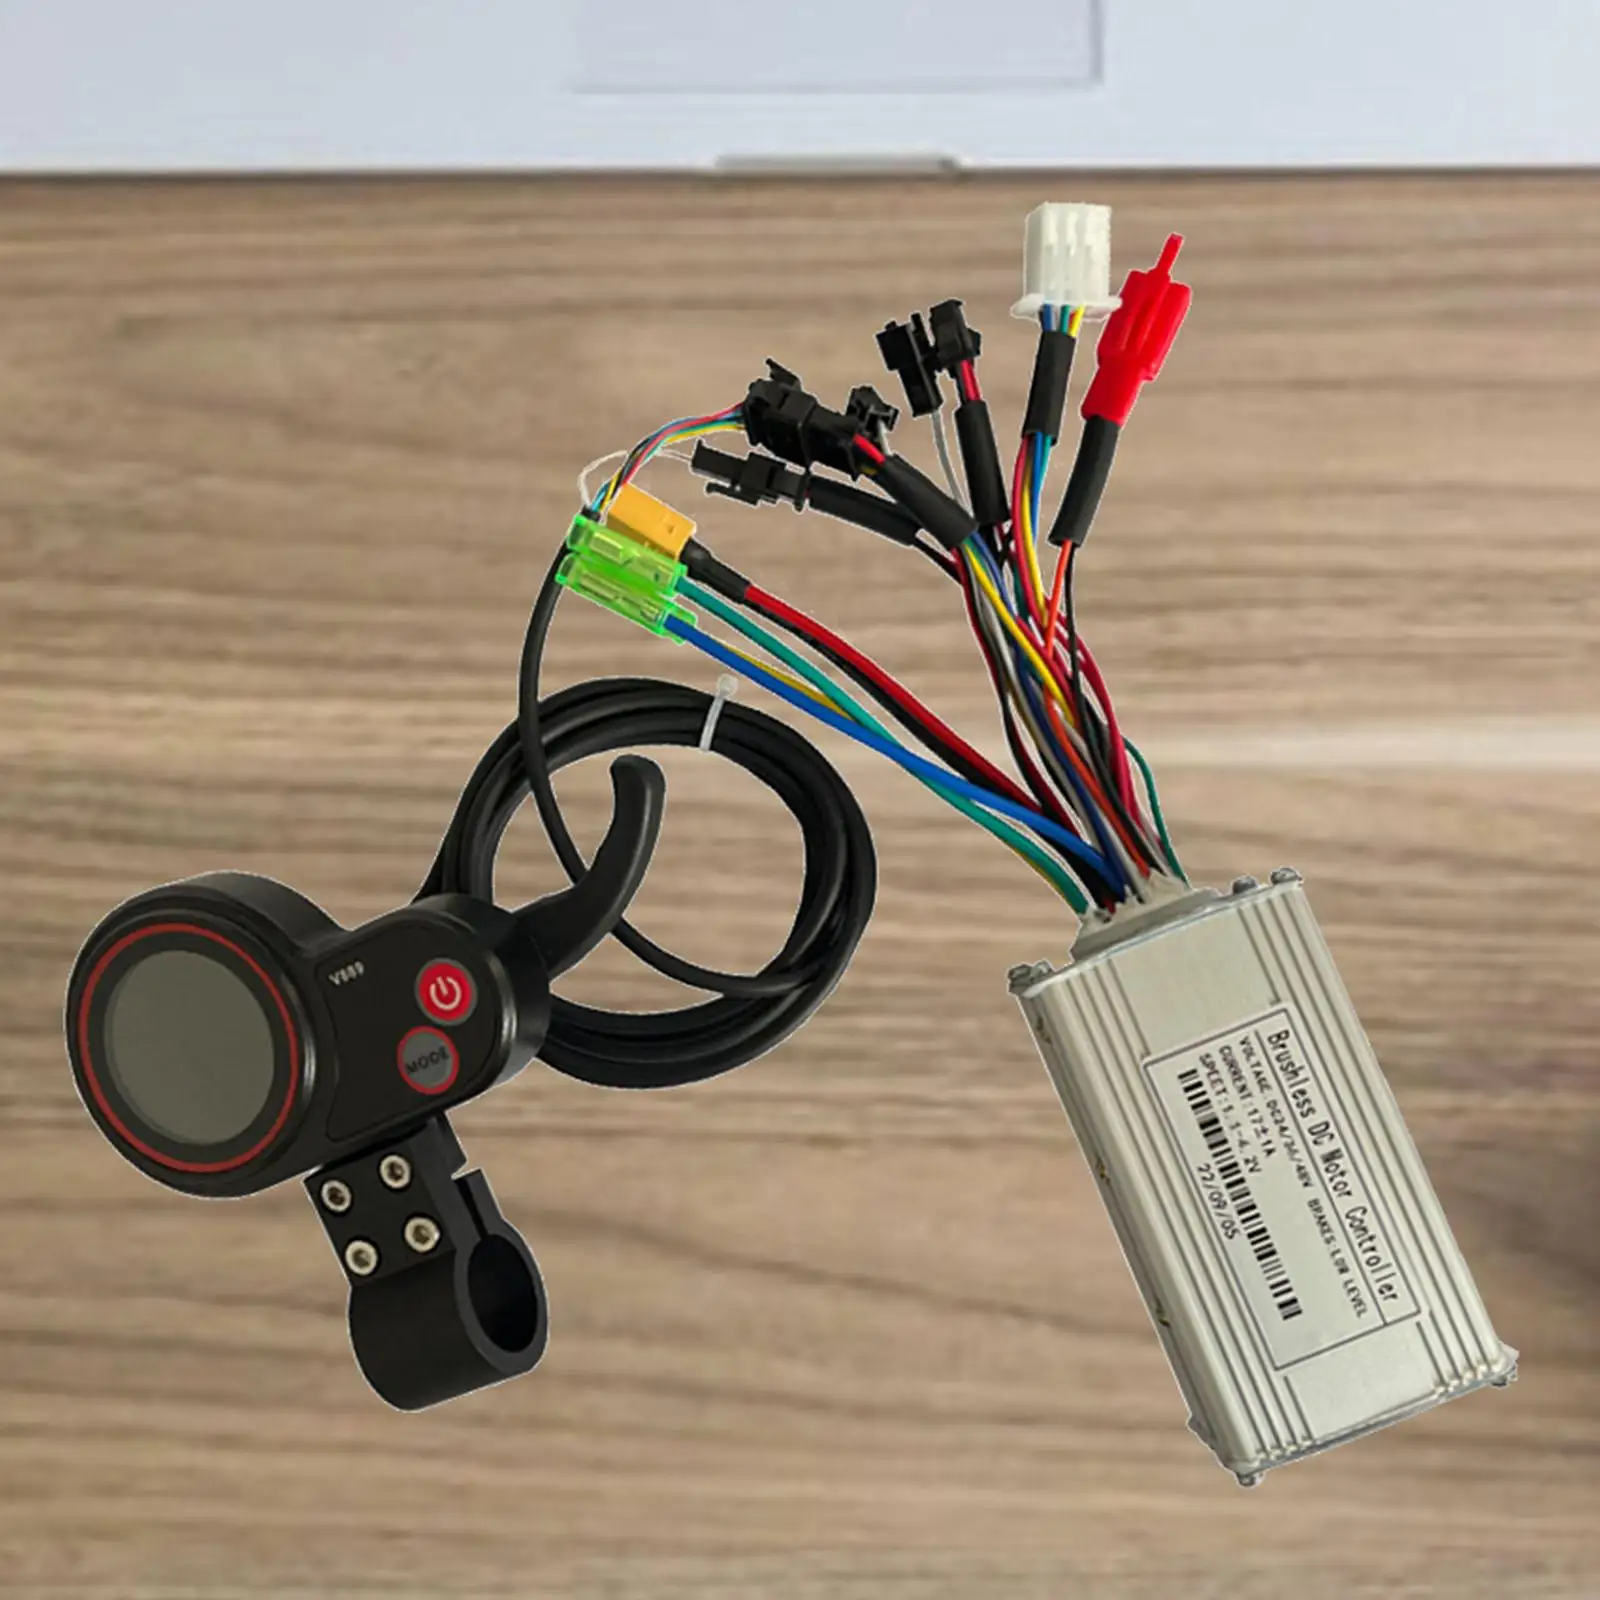 Waterproof Motor Brushless Controller LCD Panel Steady Speed for